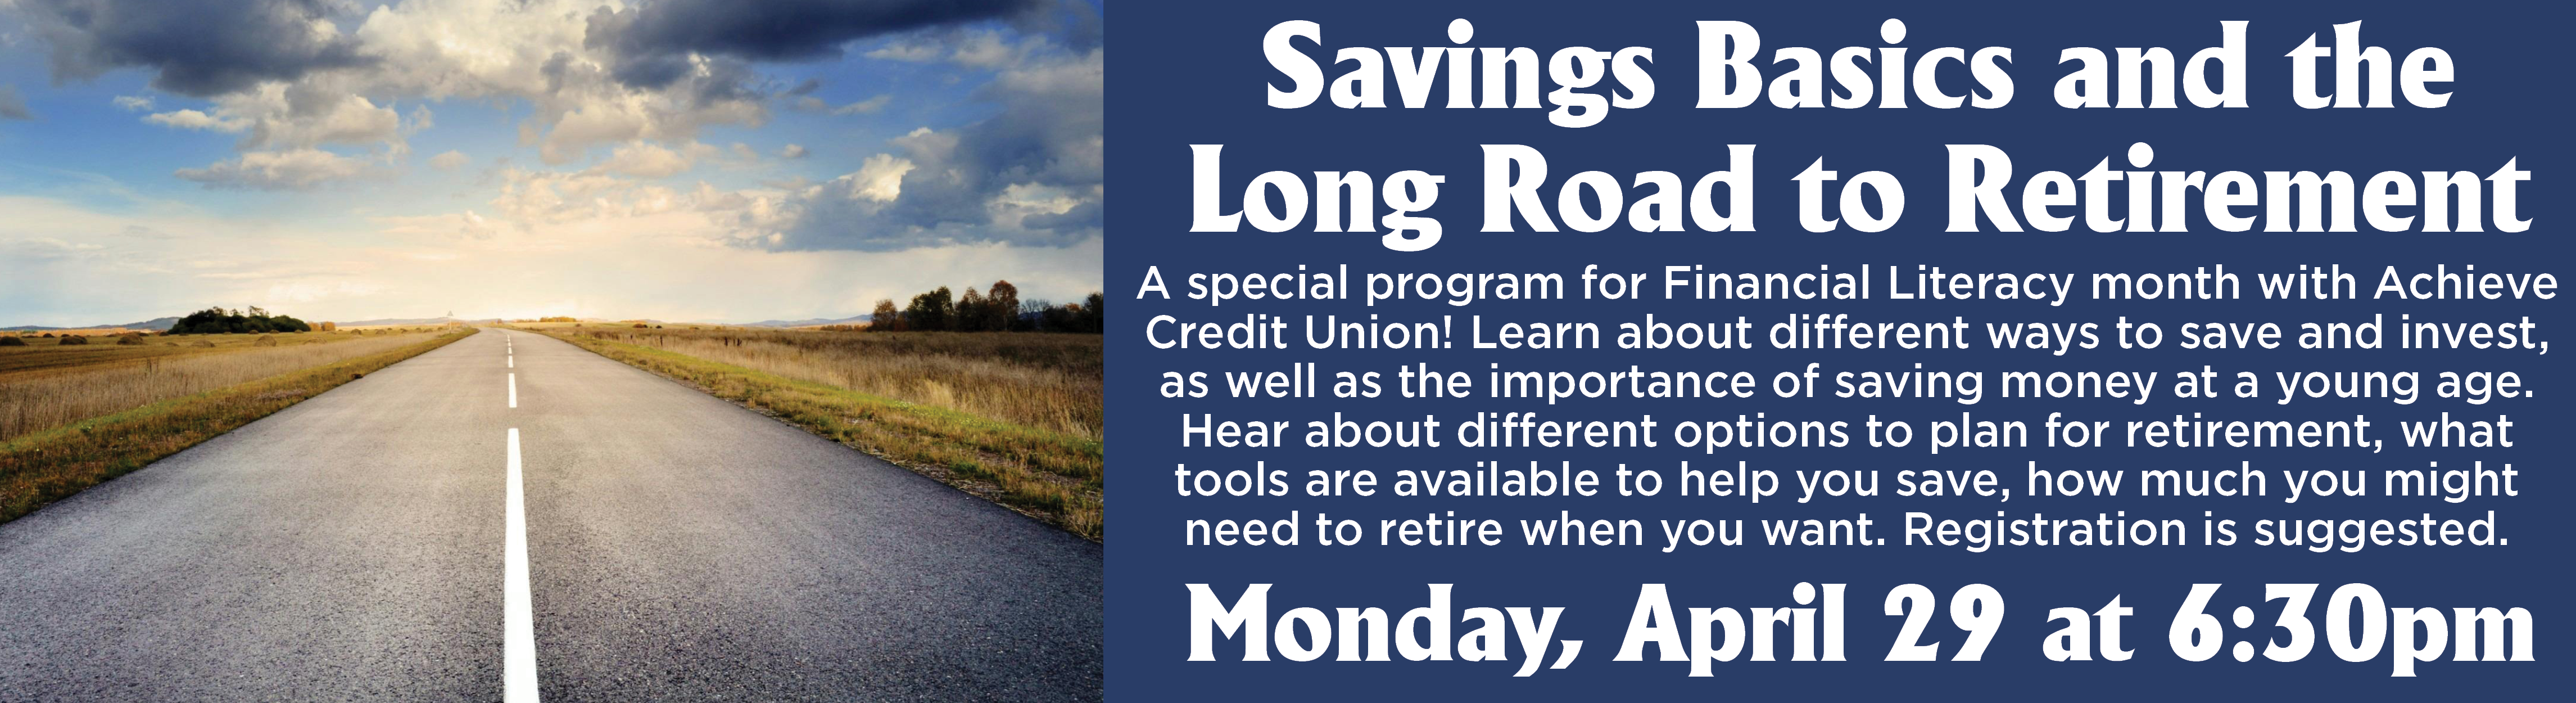 Savings Basics and the Long Road to Retirement